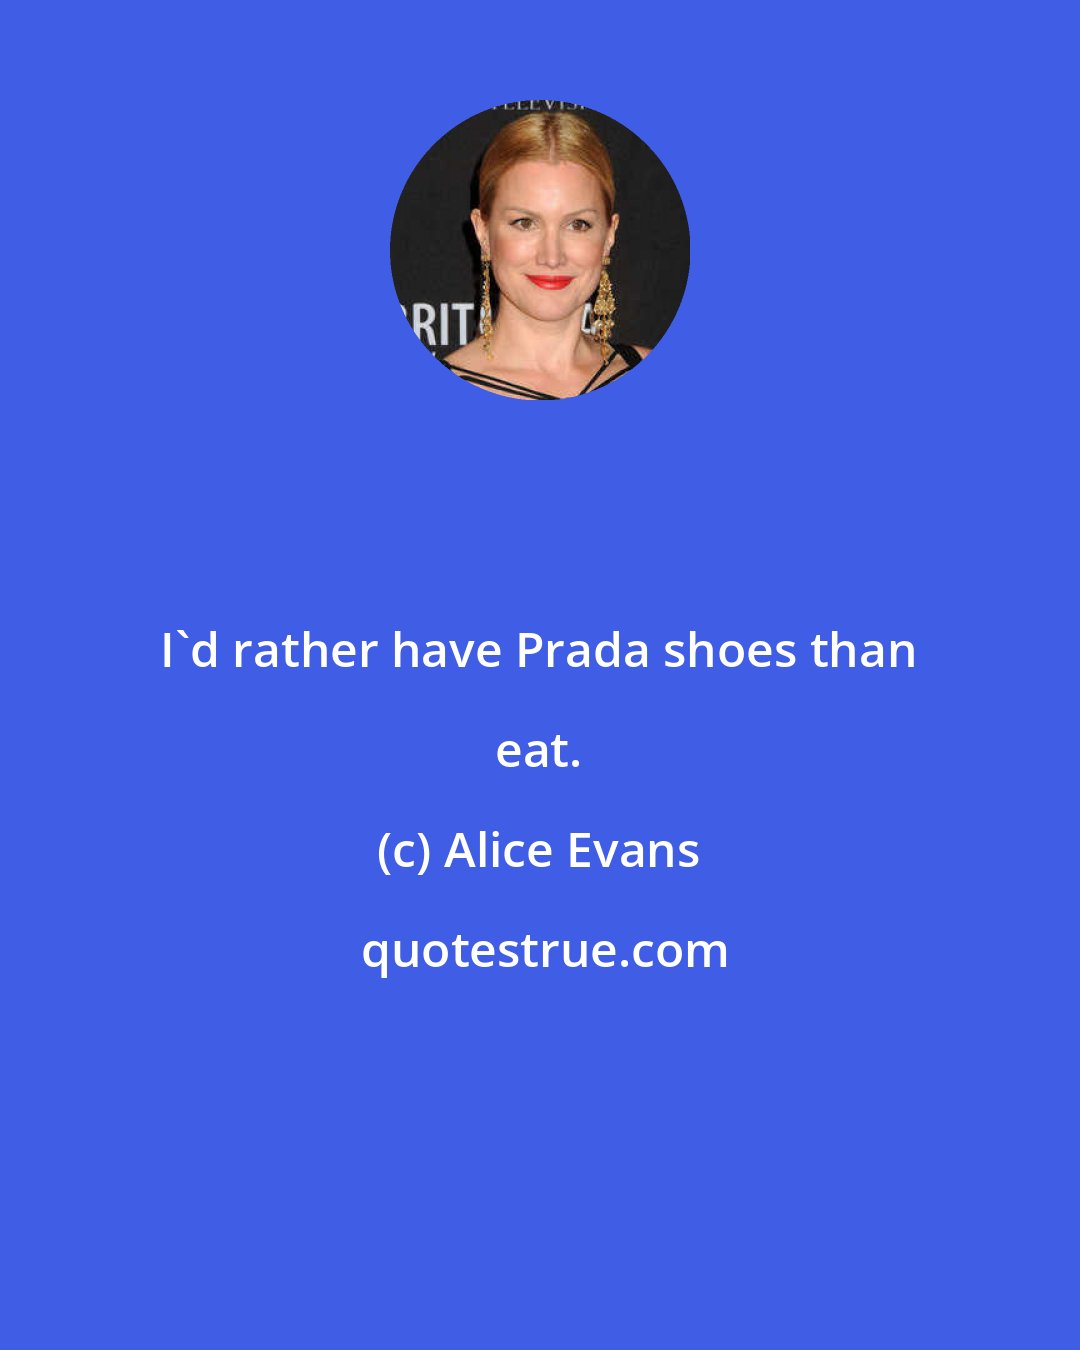 Alice Evans: I'd rather have Prada shoes than eat.